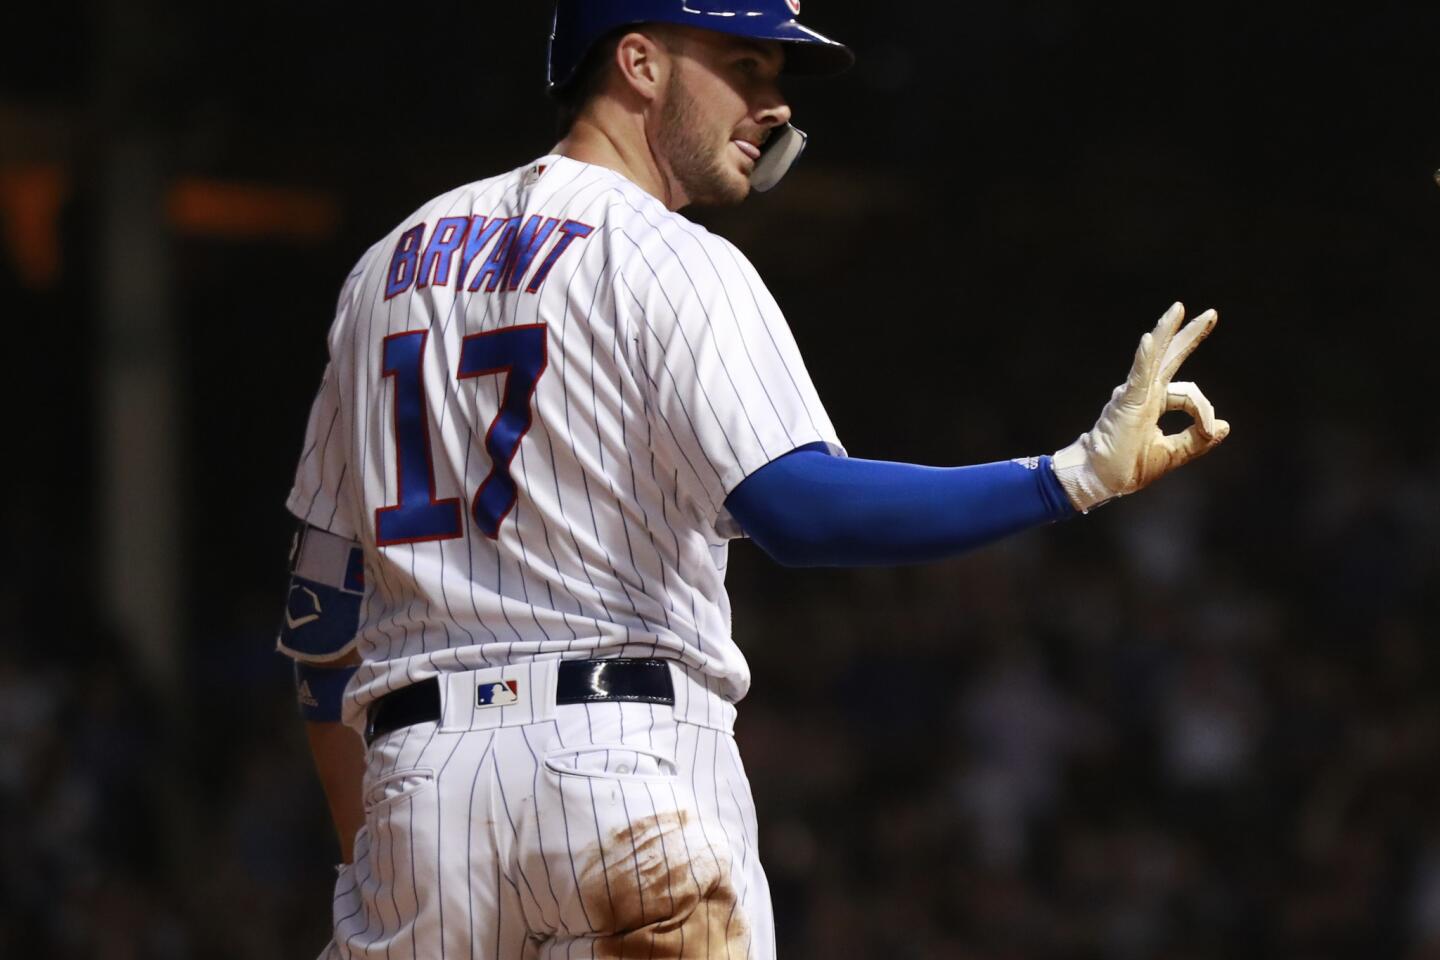 Rockies OF Kris Bryant open to playing in the infield